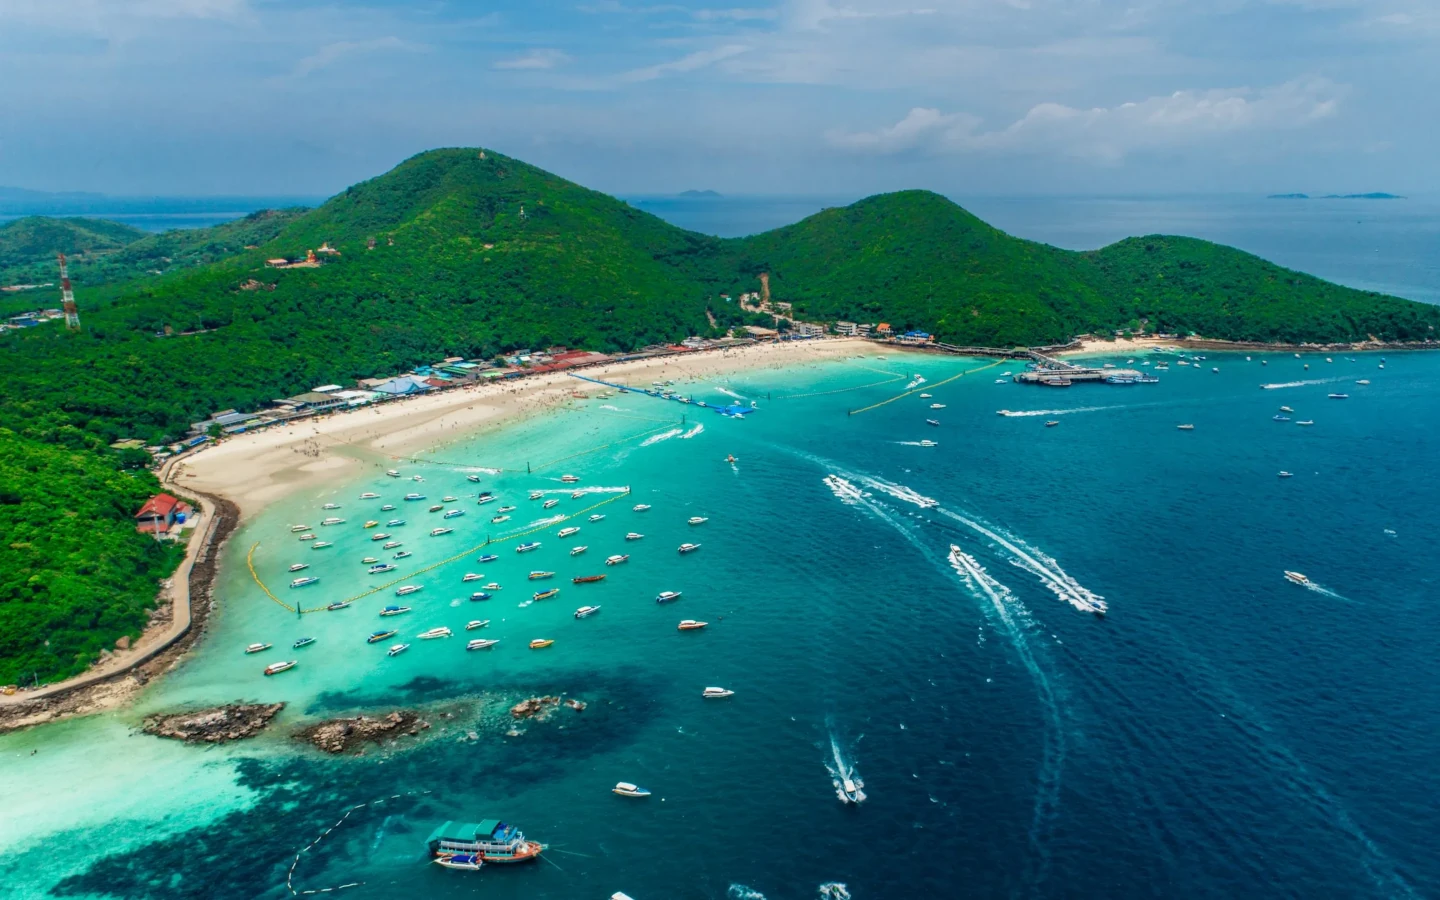 Skyview of a beach and boats at Pattaya.